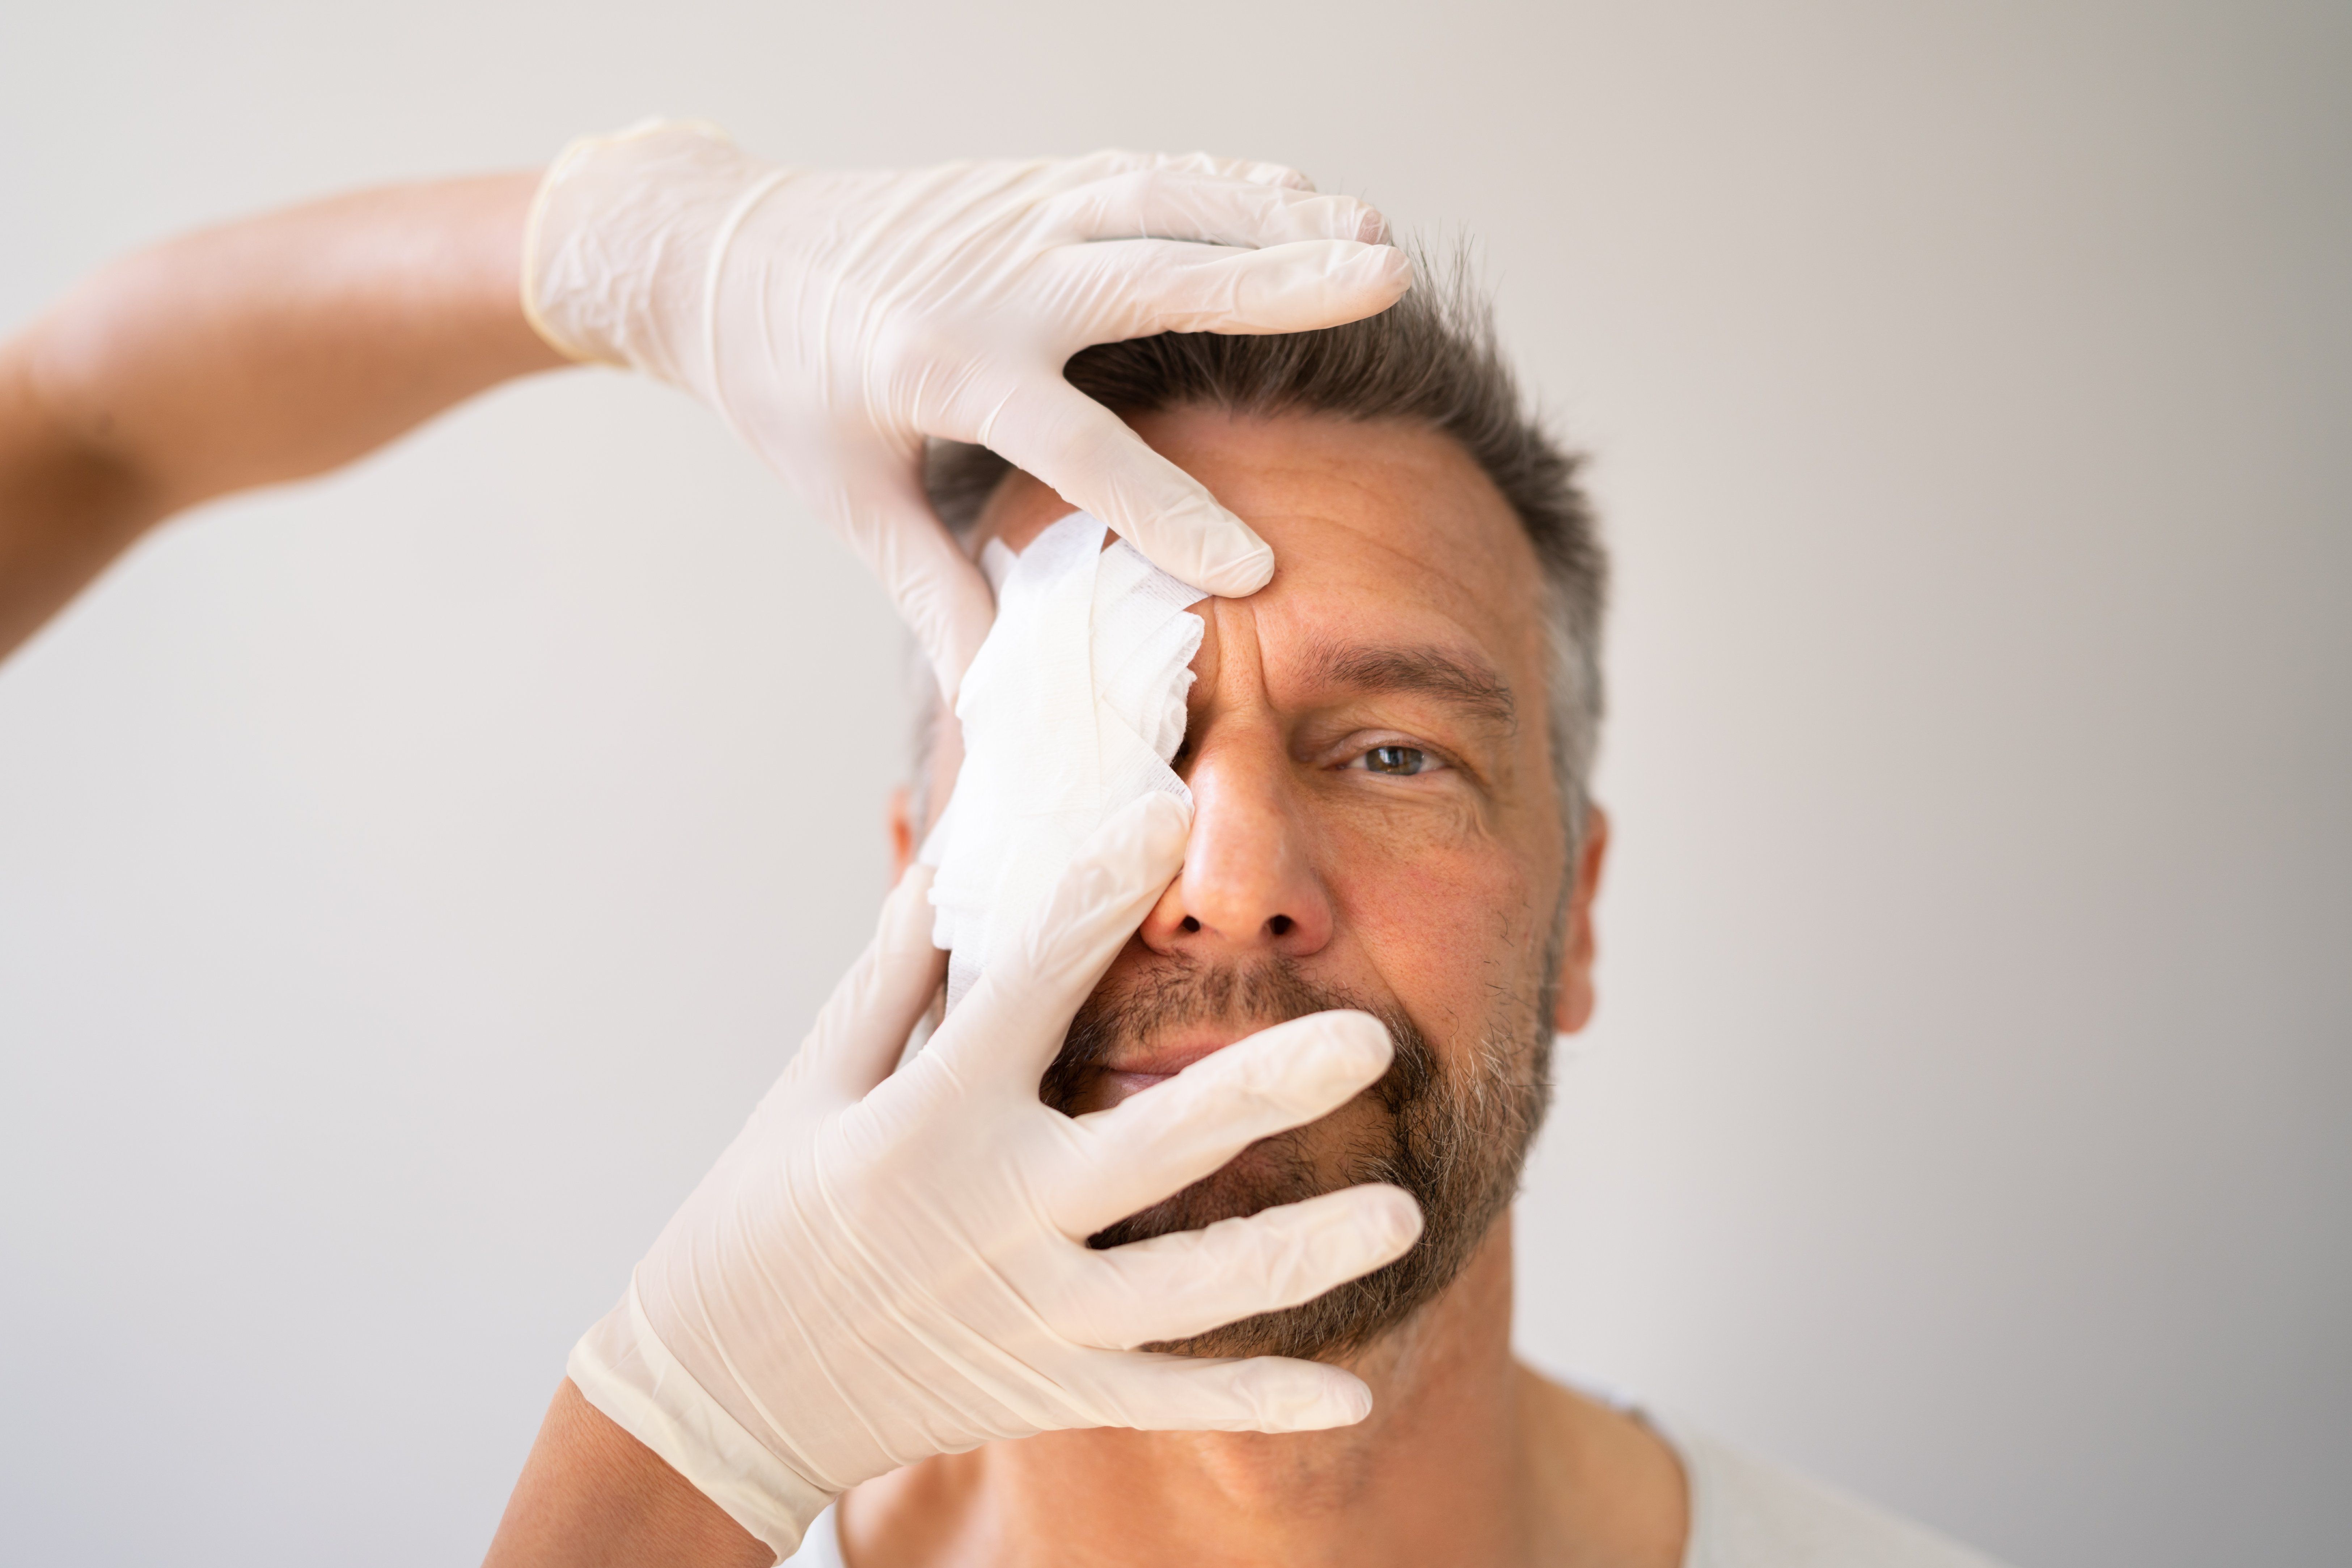 Common Types of Eye Injuries